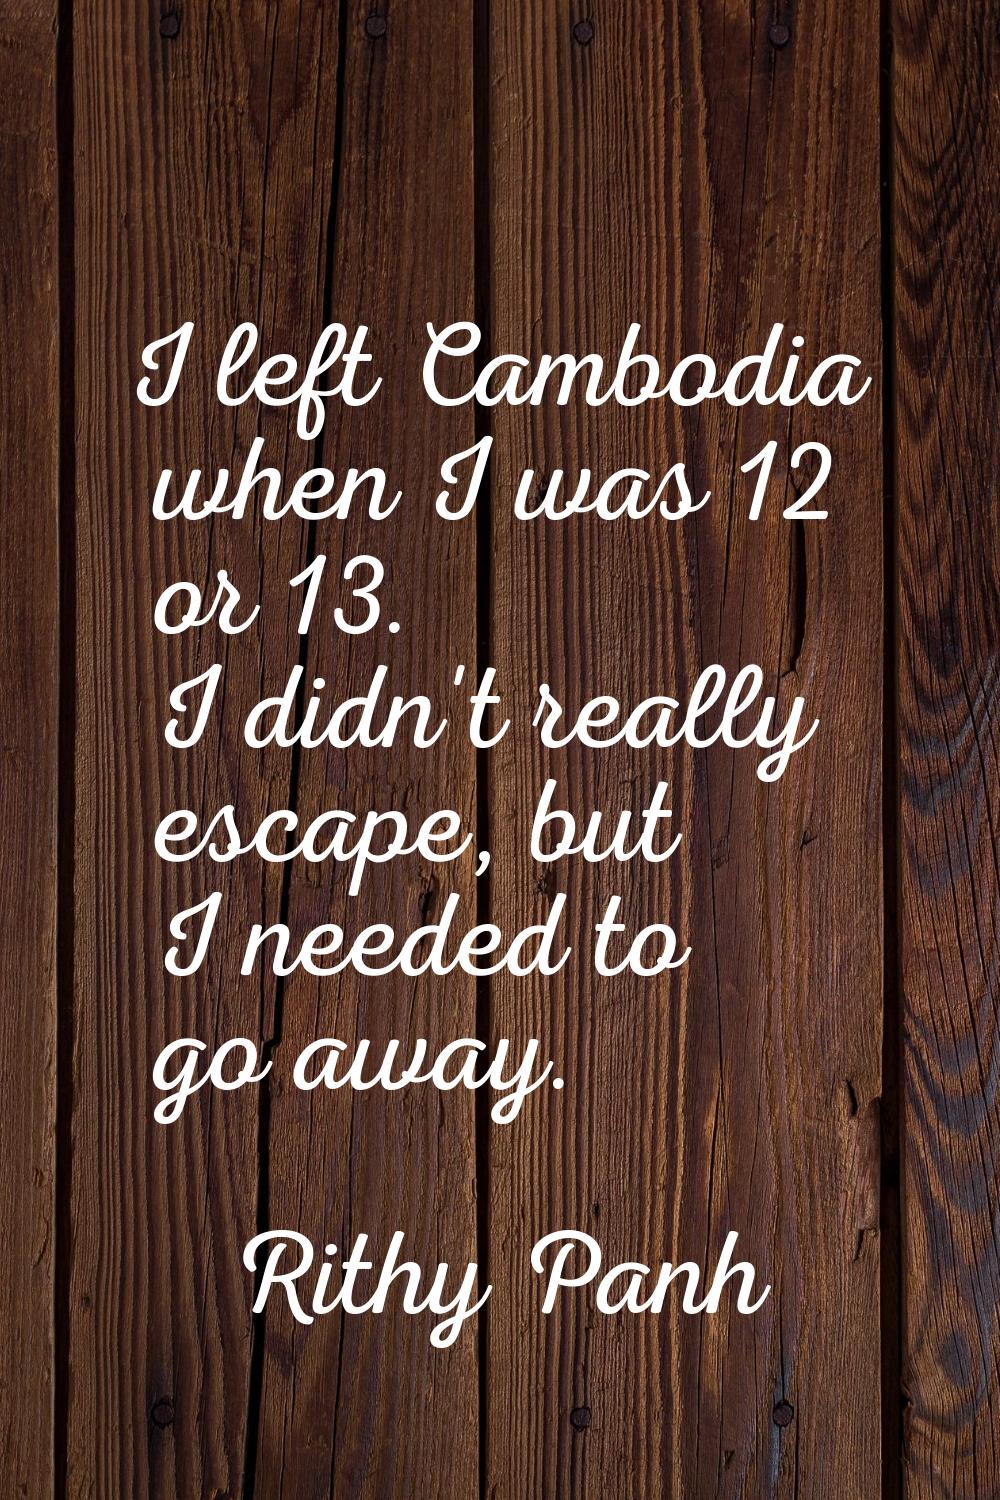 I left Cambodia when I was 12 or 13. I didn't really escape, but I needed to go away.